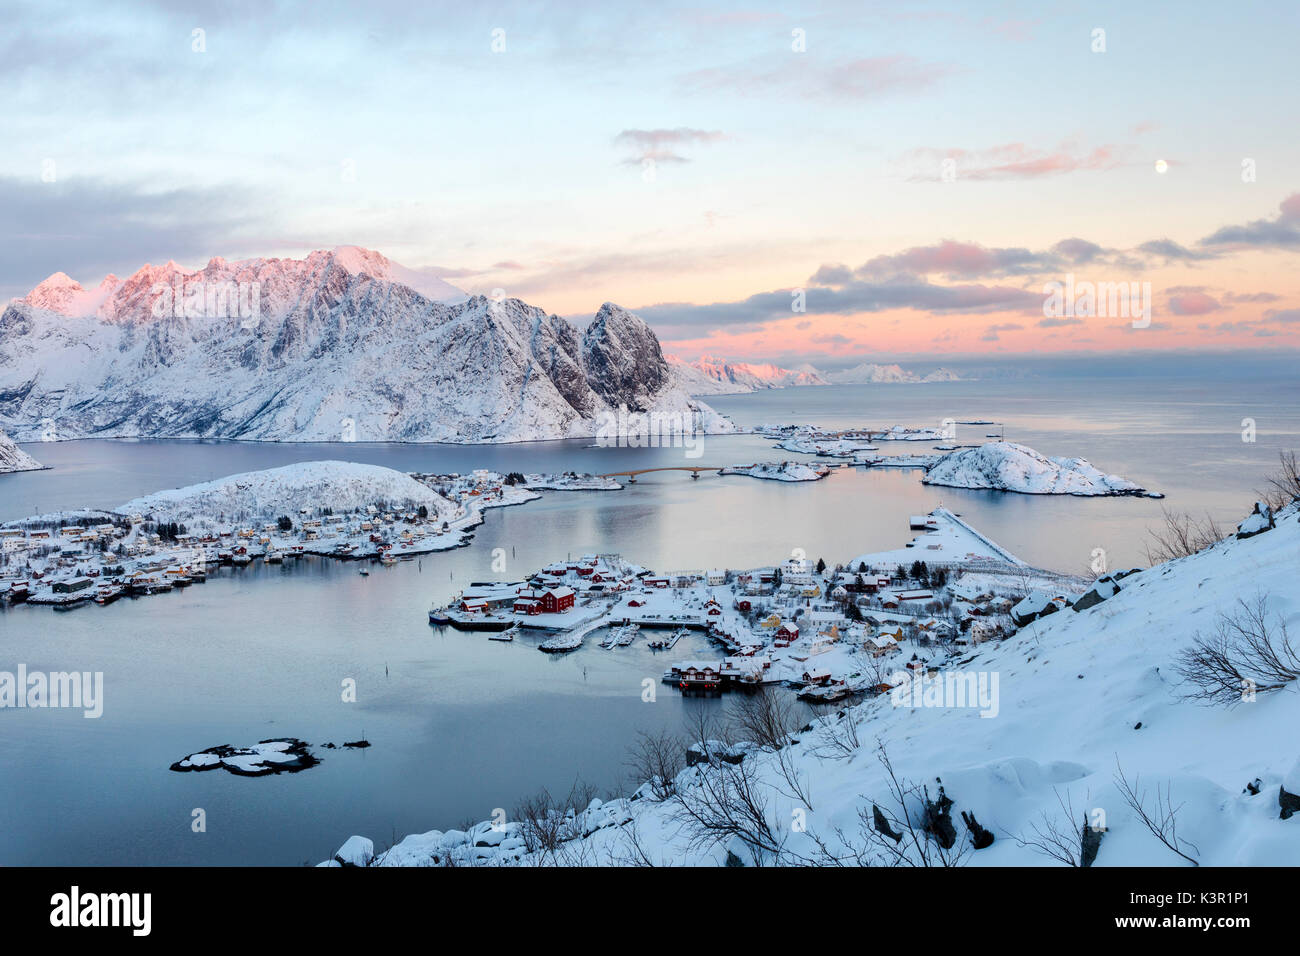 The pink colors of sunset and snowy peaks surround the fishing villages Reine Nordland Lofoten Islands Norway Europe Stock Photo